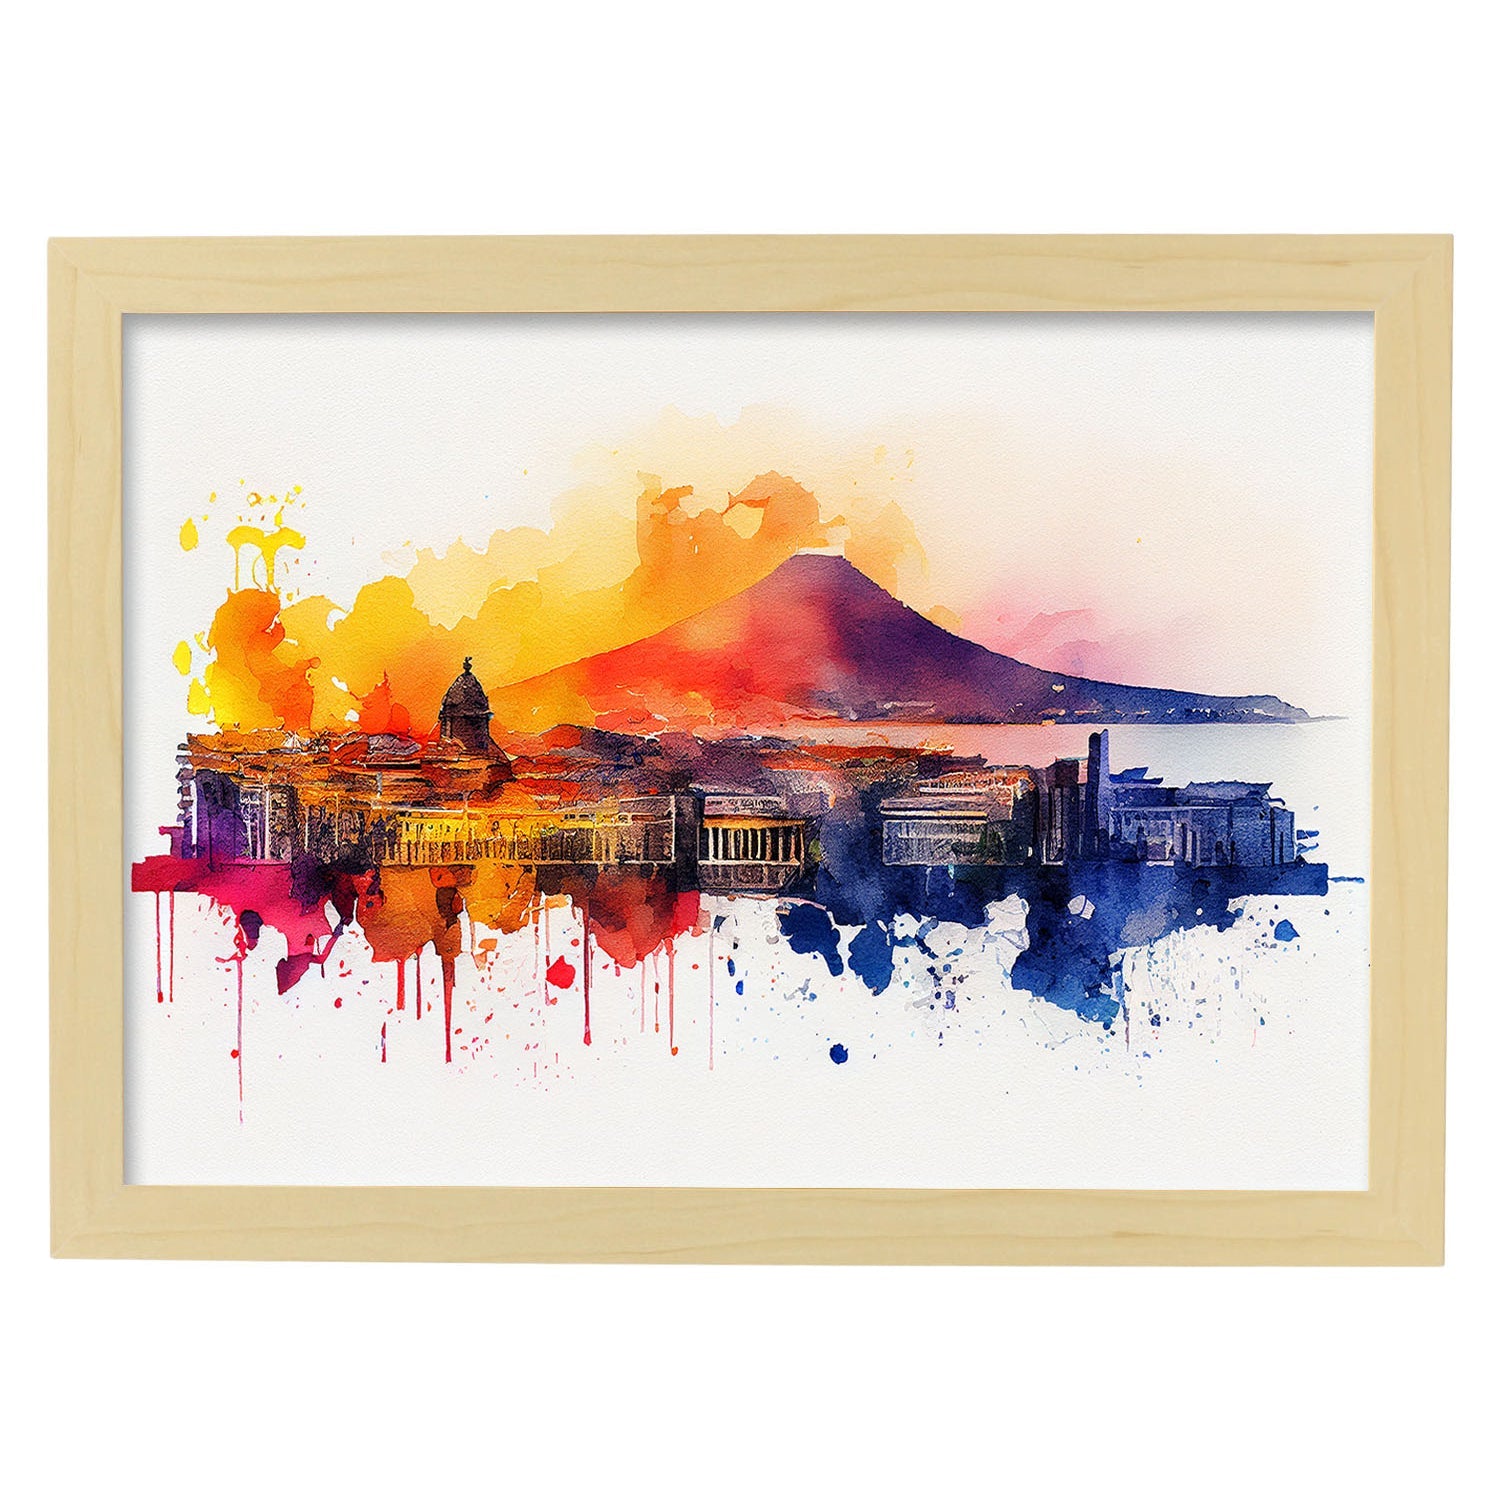 Nacnic watercolor of a skyline of the city of Naples. Aesthetic Wall Art Prints for Bedroom or Living Room Design.-Artwork-Nacnic-A4-Marco Madera Clara-Nacnic Estudio SL